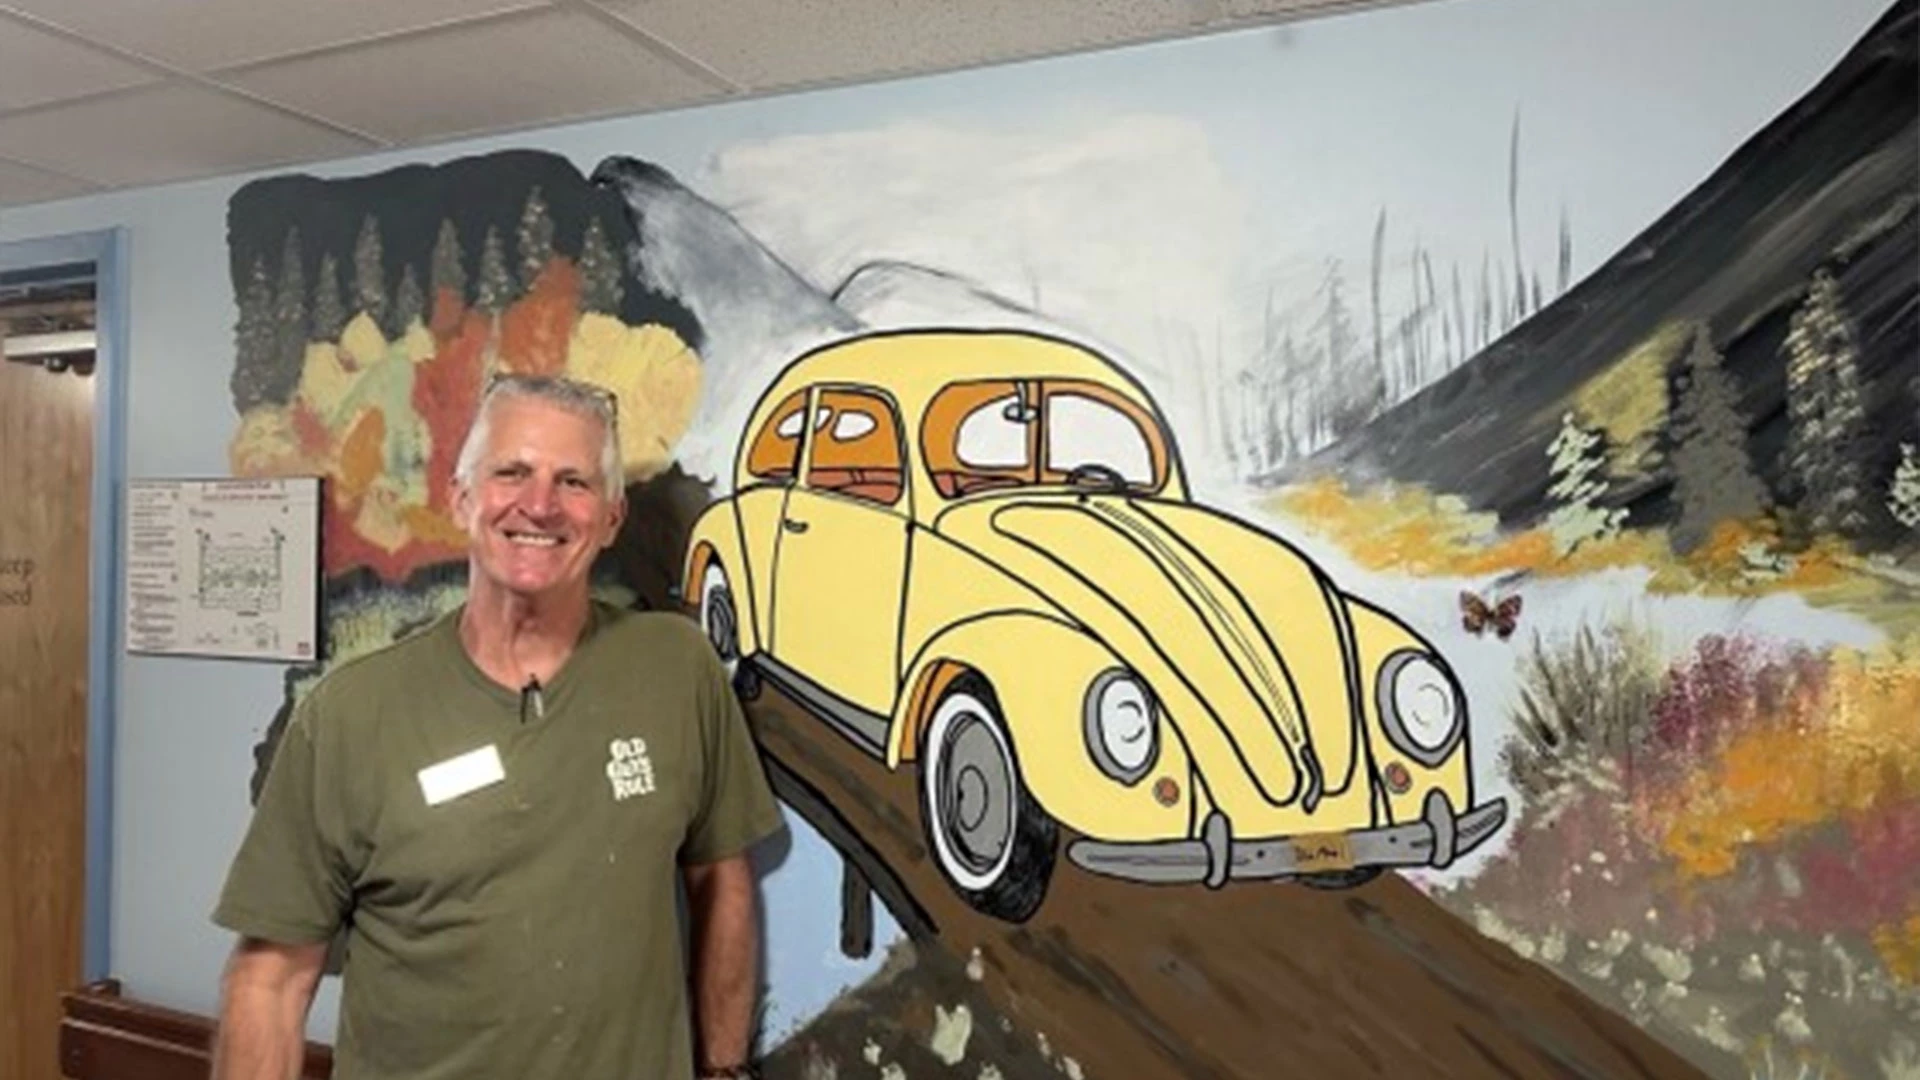 Man standing in front of a mural of an old VW